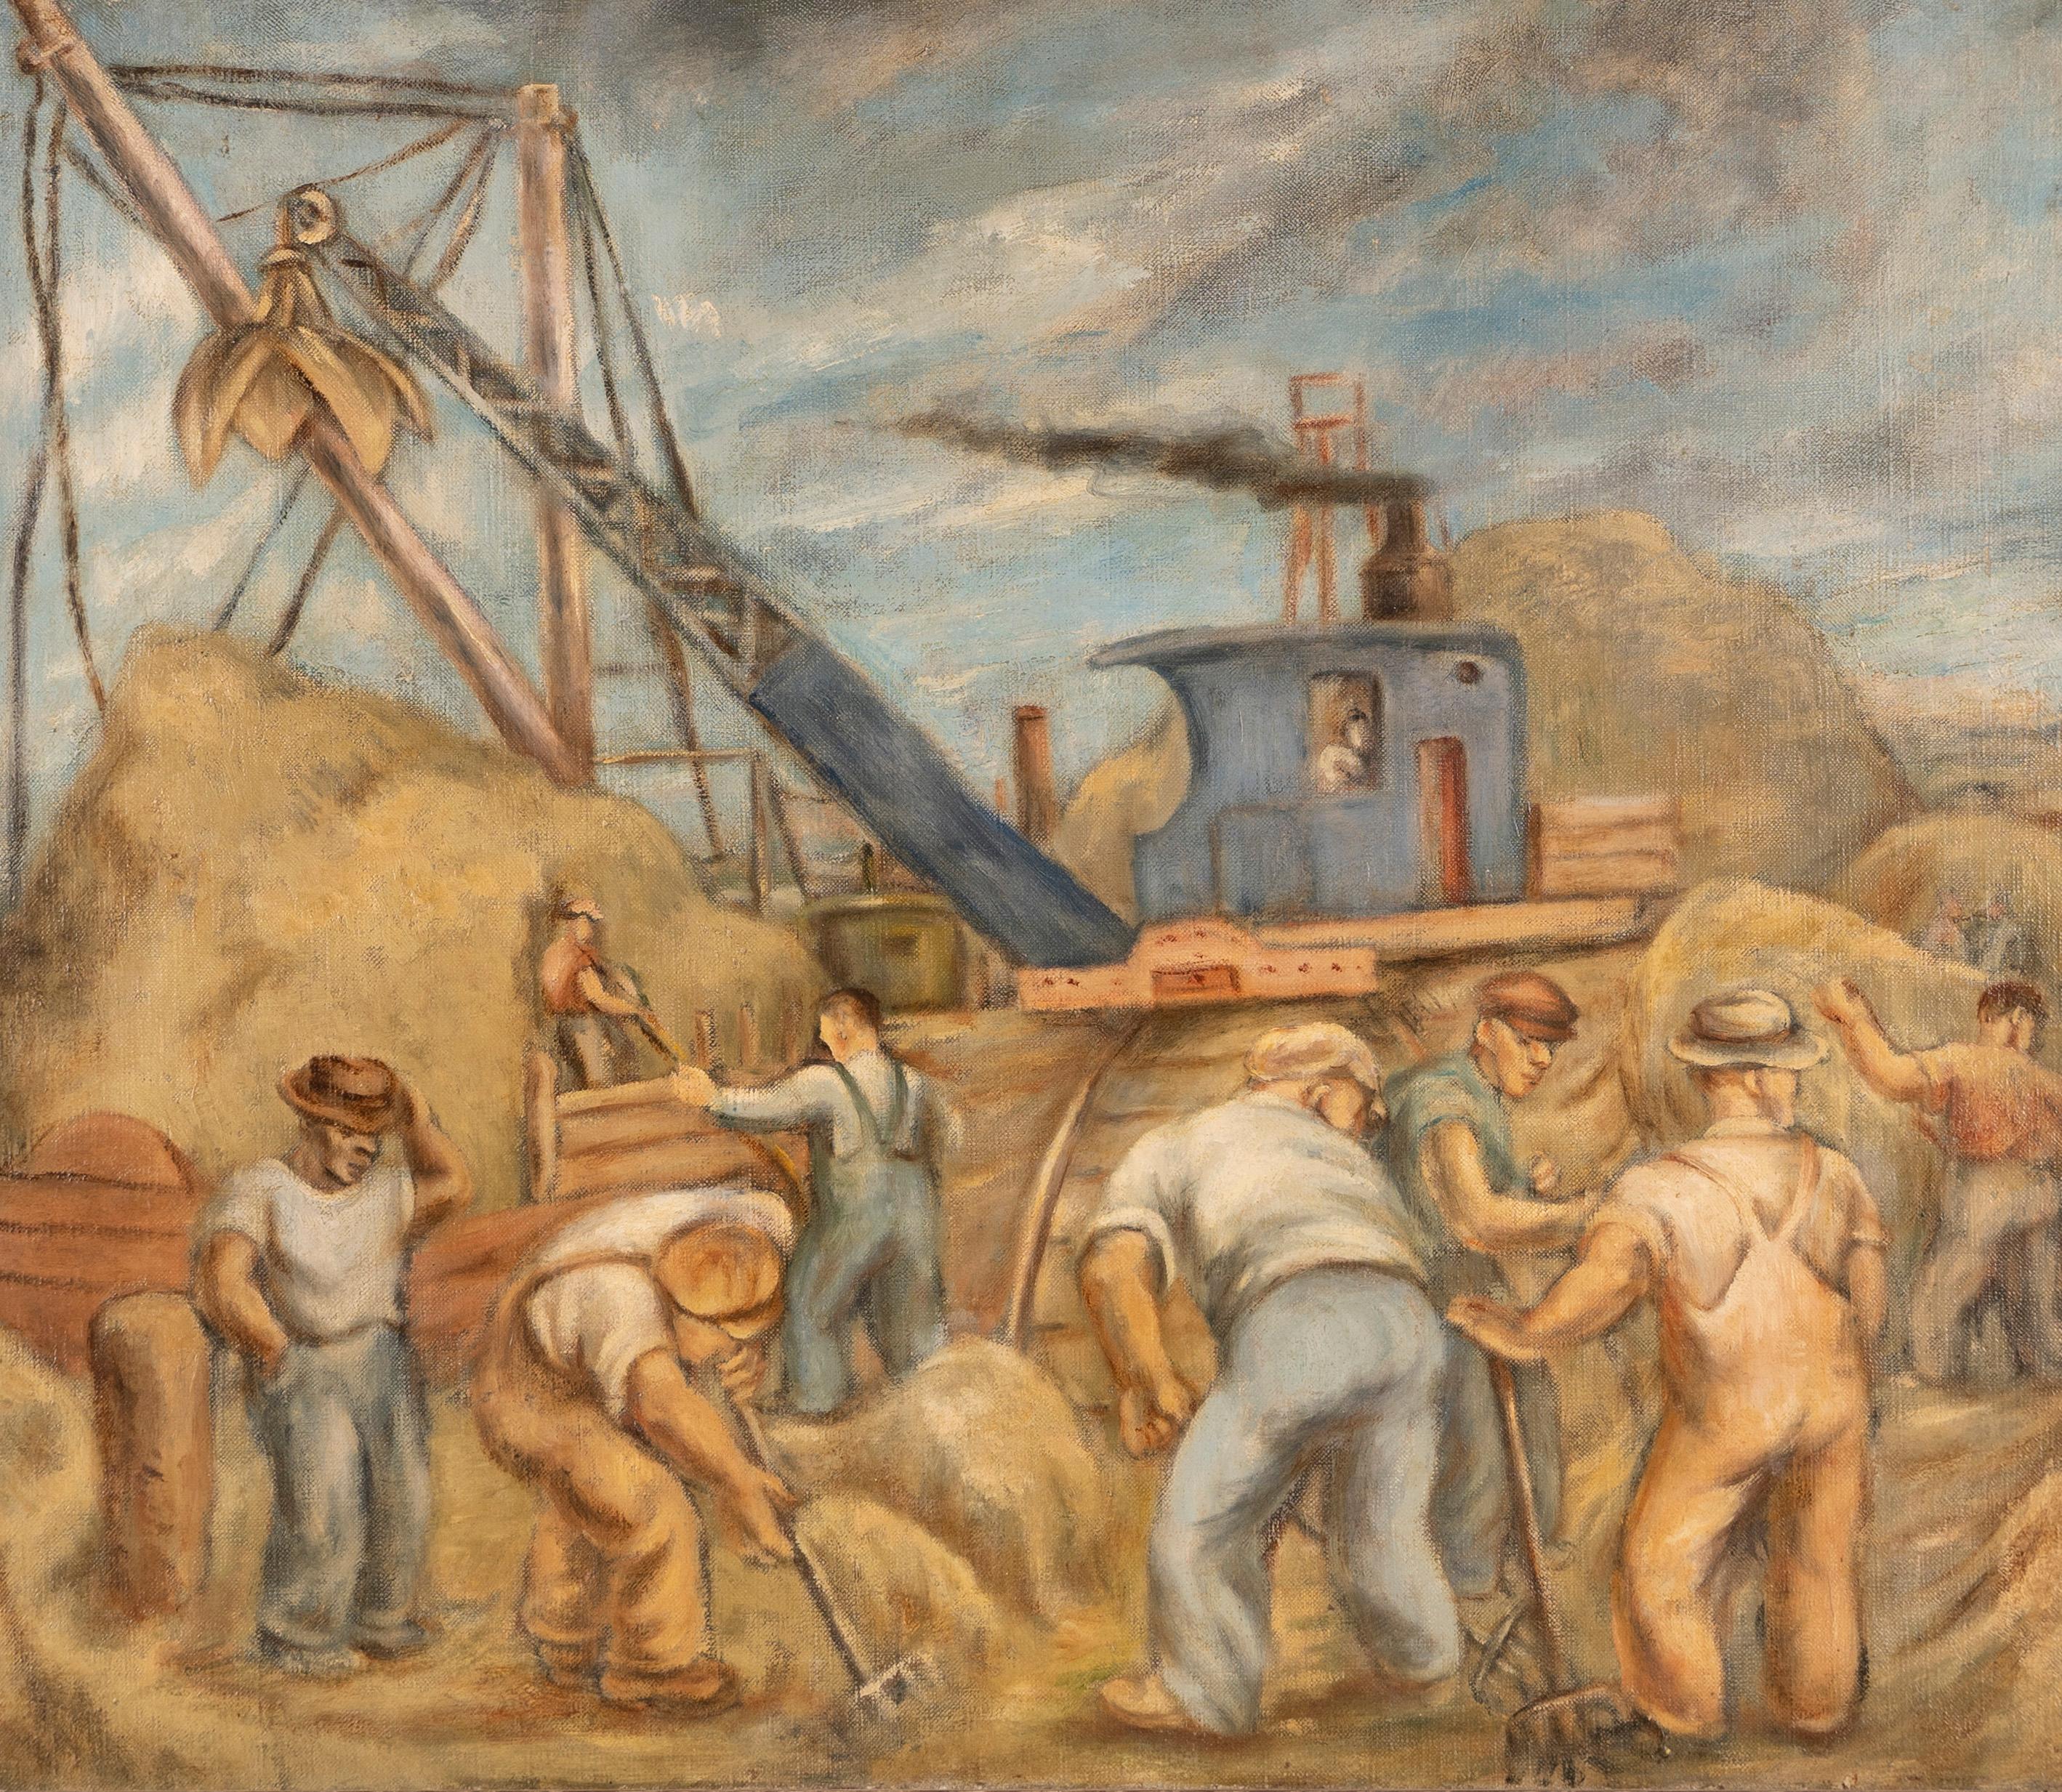 Antique American modernist WPA oil painting of men working in an industrial setting.  Oil on board, circa 1940.  Unsigned.  Image size, 26L x 22H.  Housed in a modern frame.